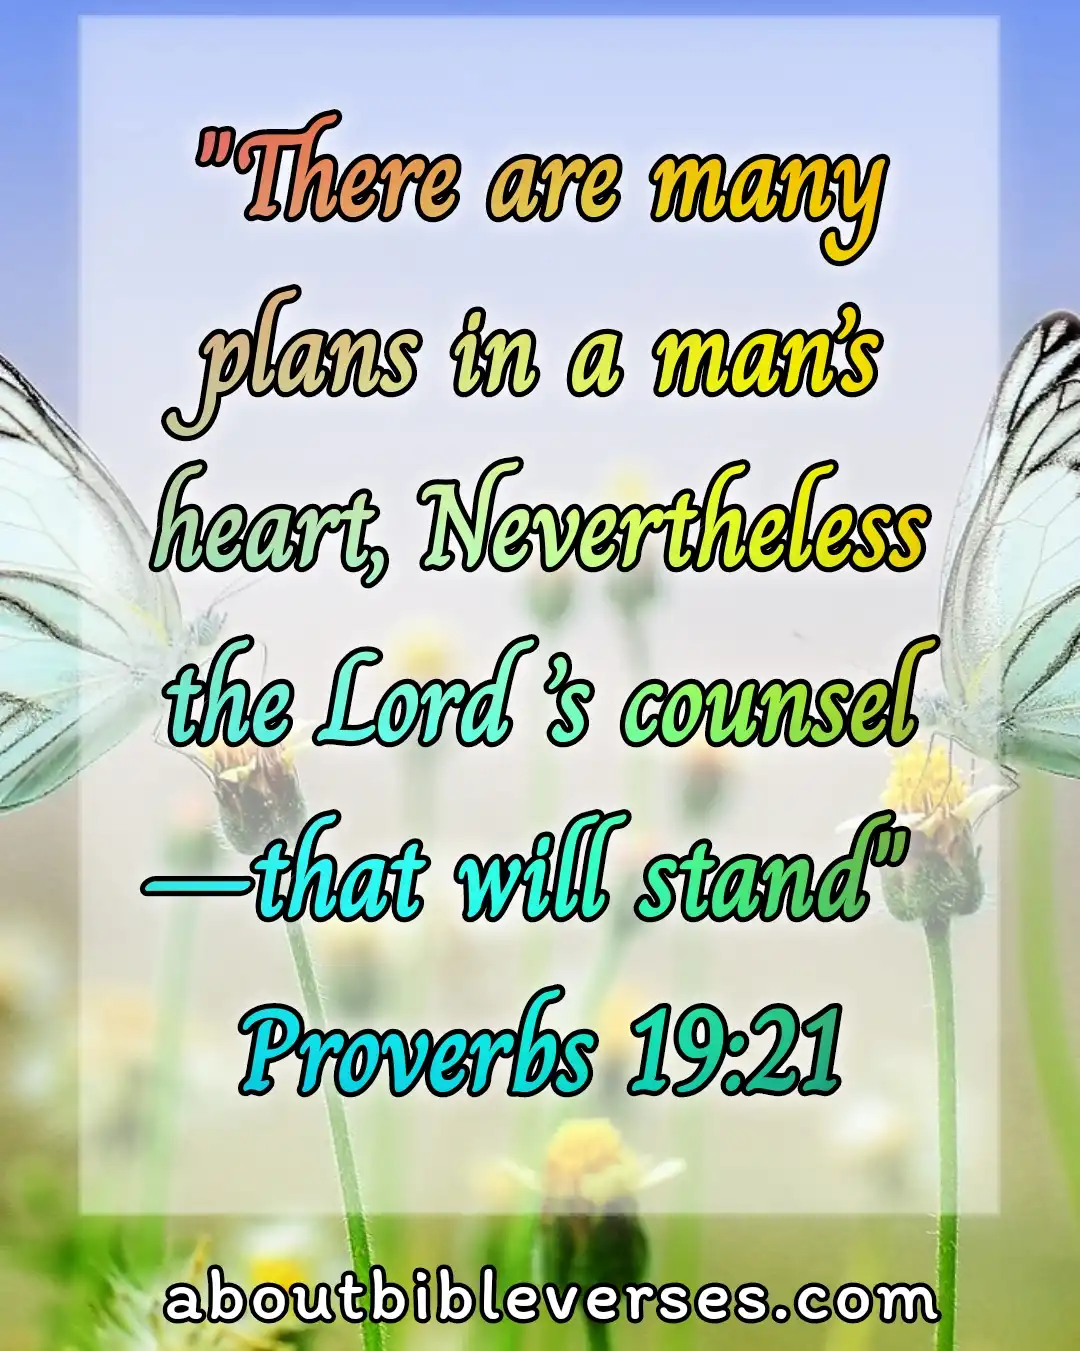 Bible verses about God's plans (Proverbs 19:21)